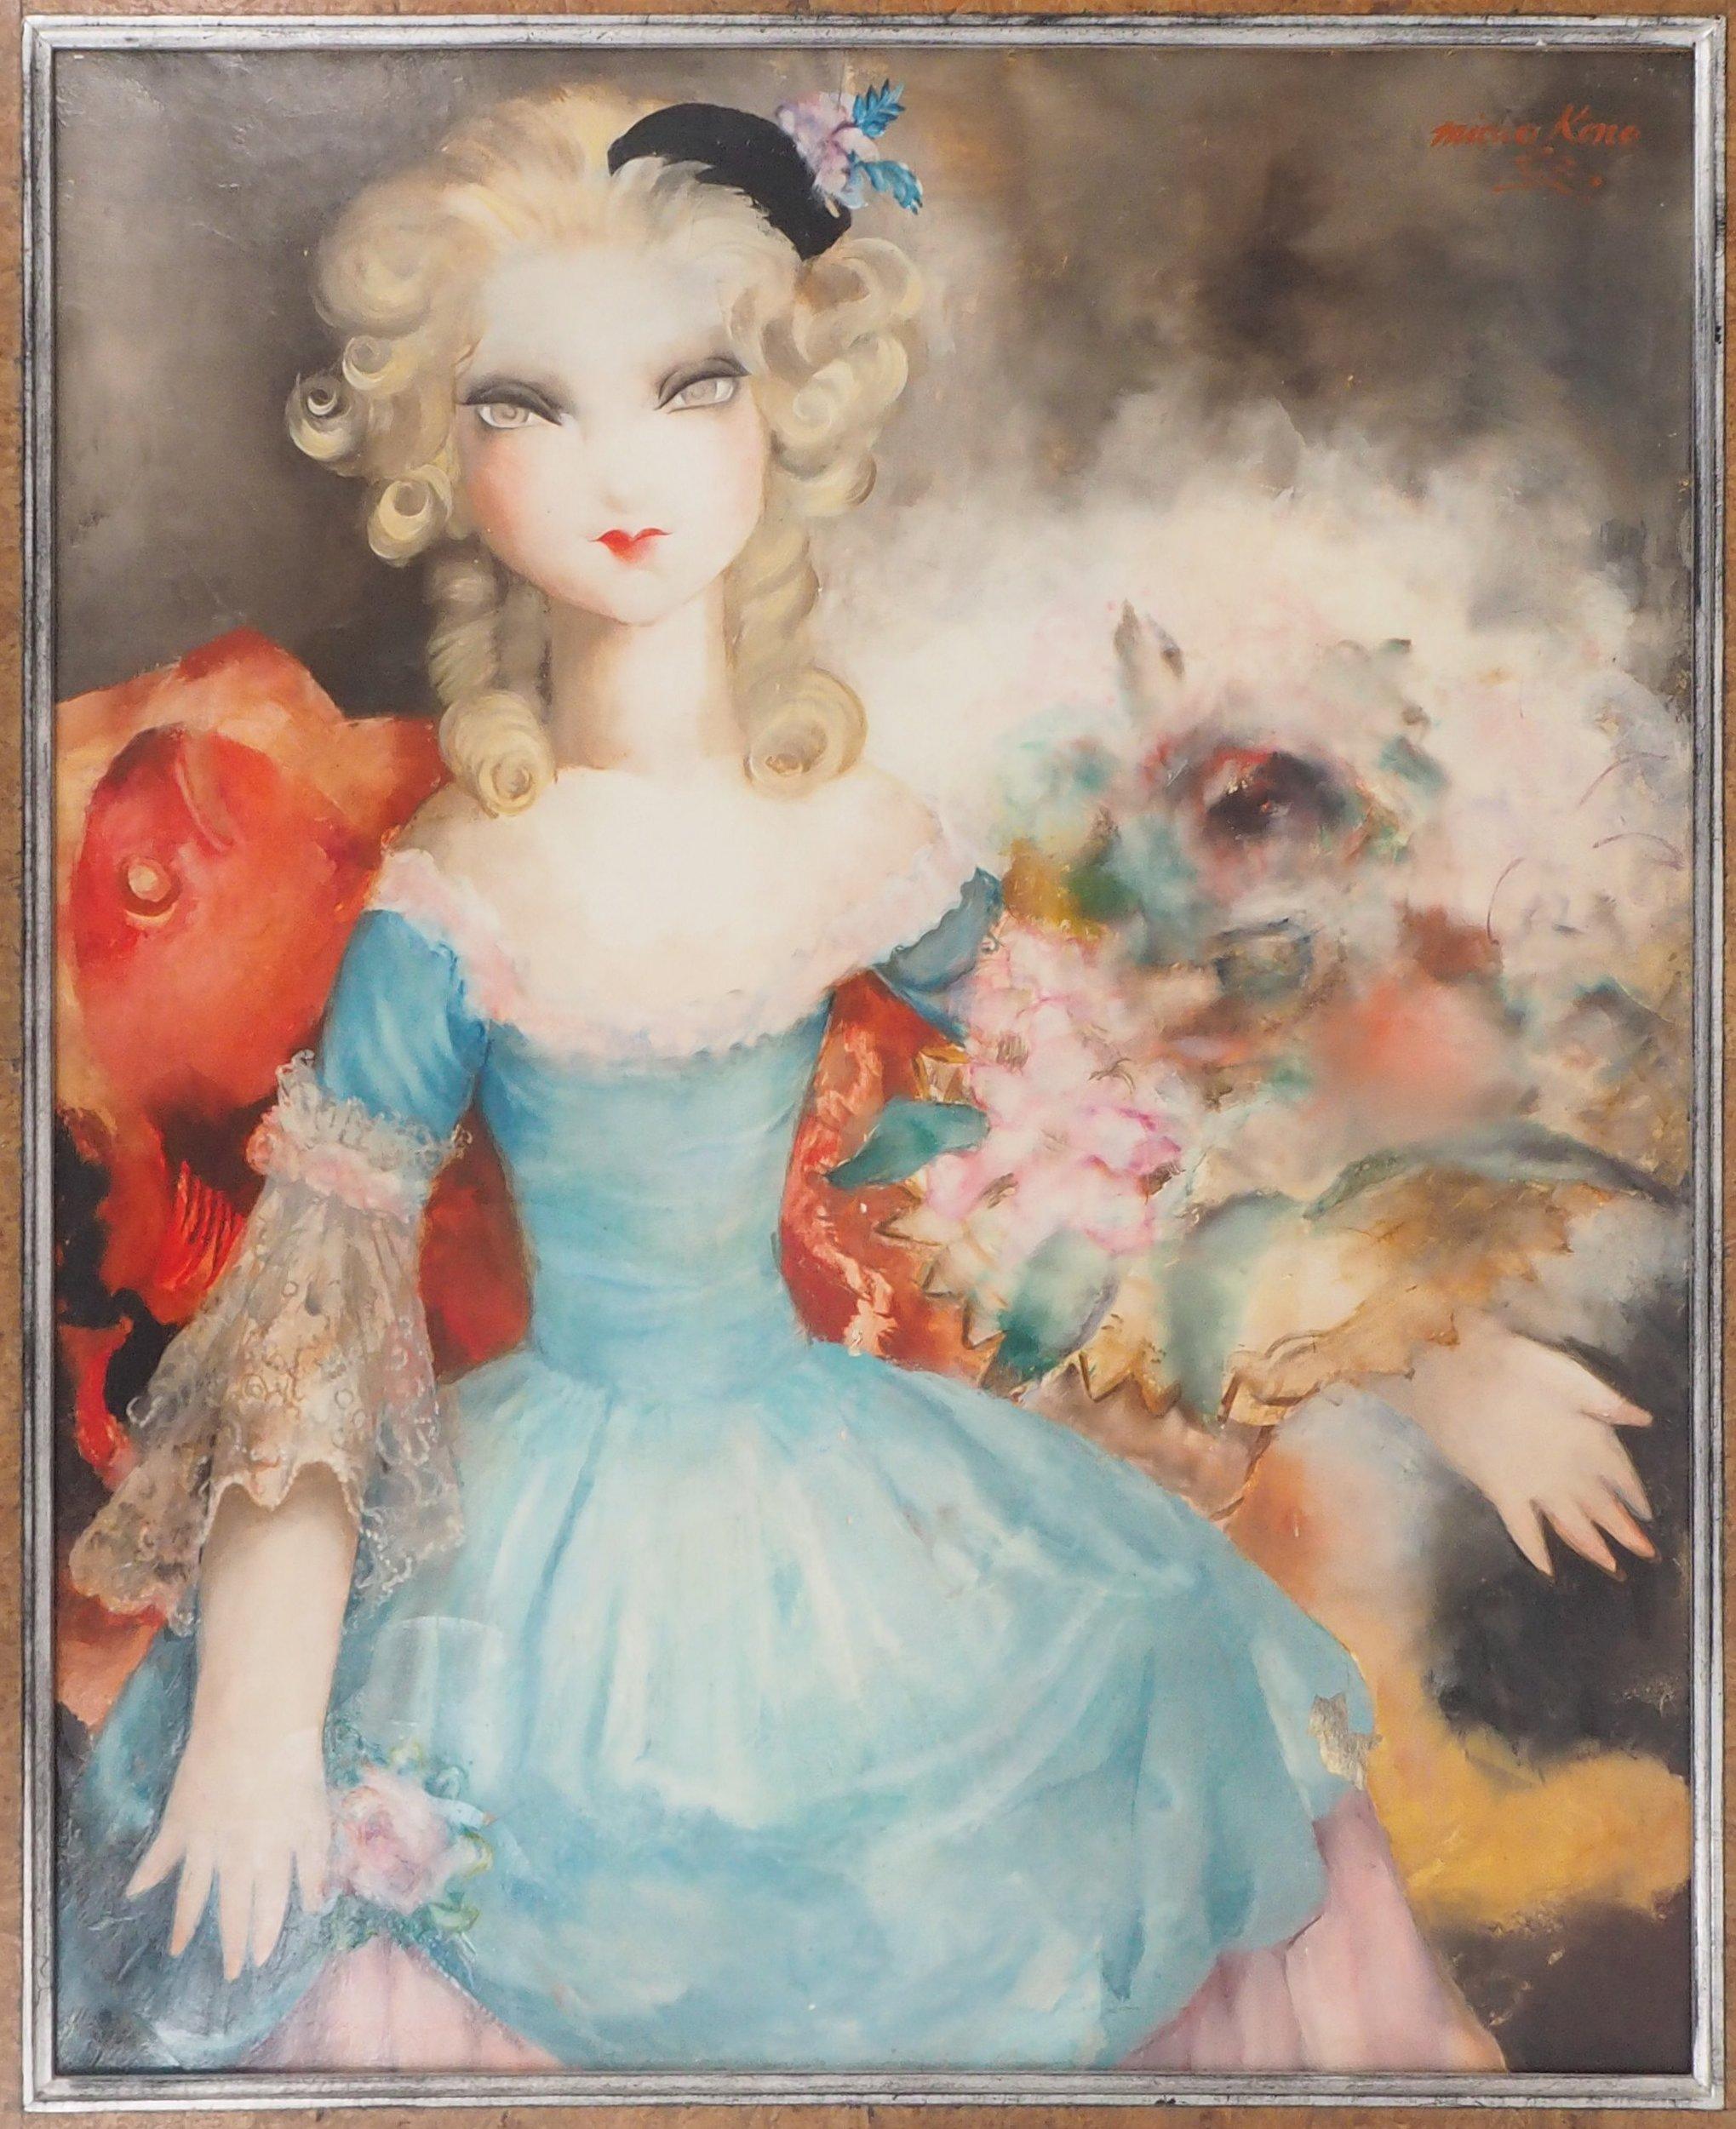 The Doll - Original Oil on Canvas - Signed - Painting by Micao Kono